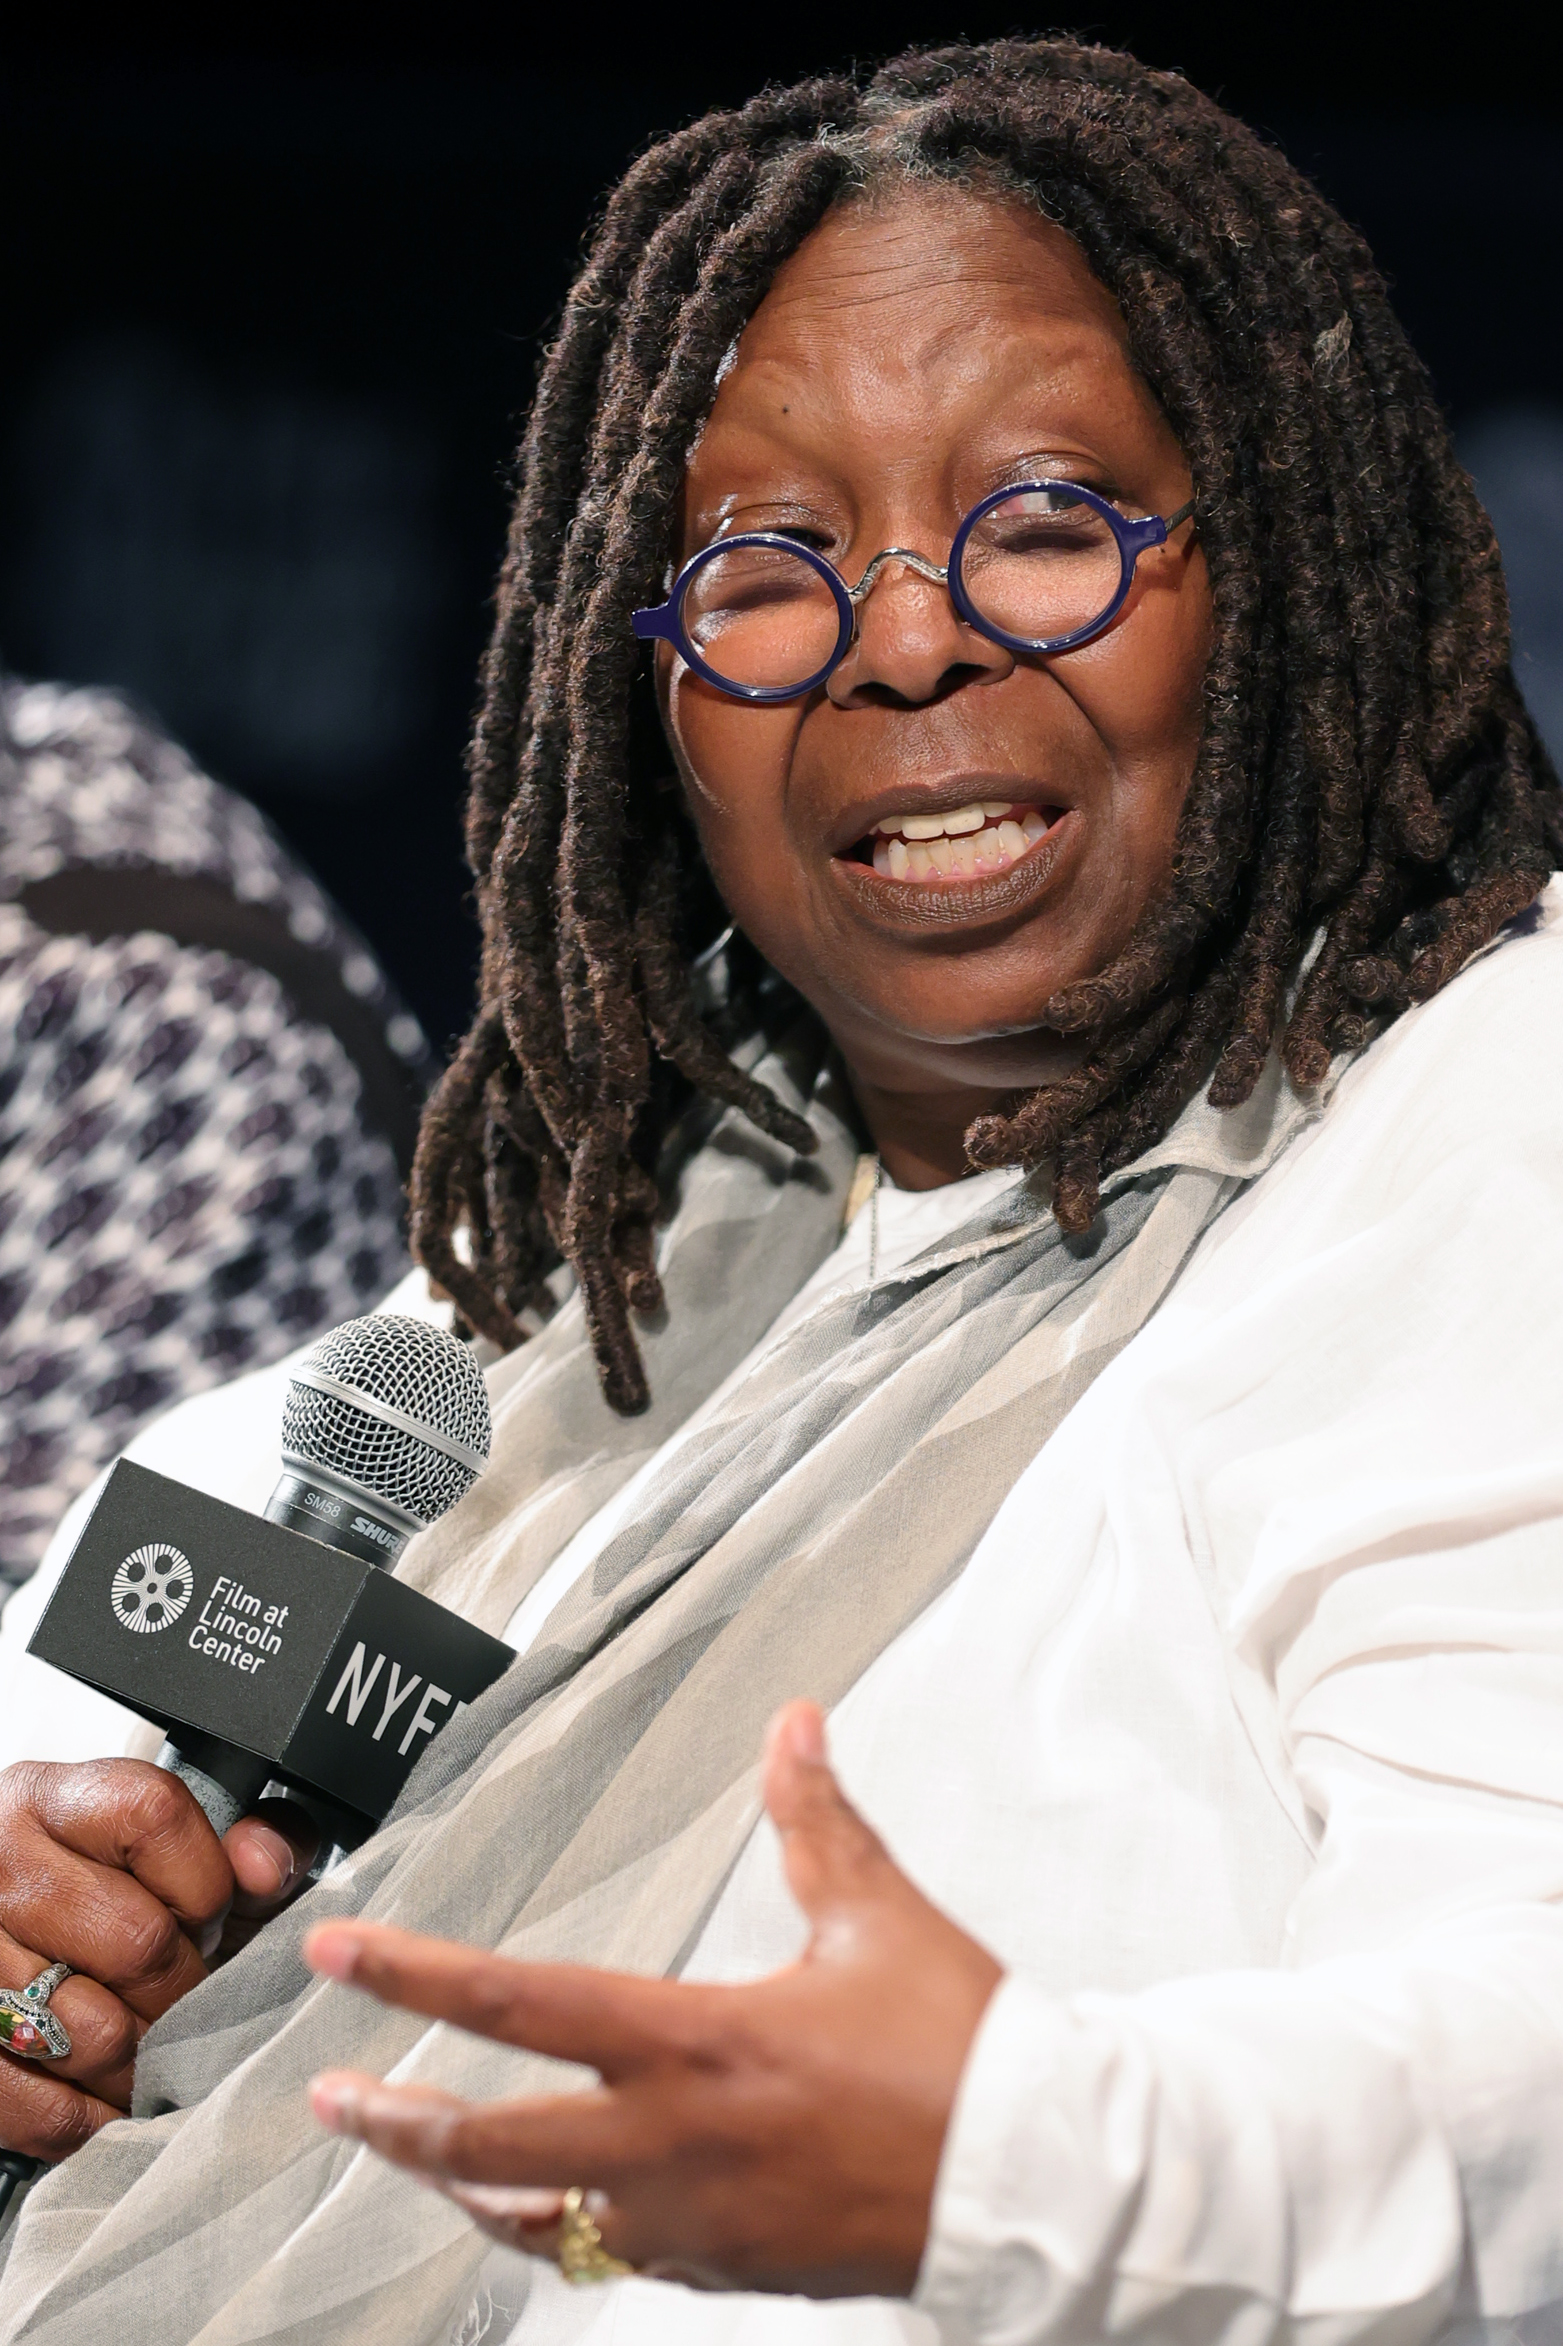 Whoopi Goldberg takes part in the "Till" press conference in New York City on October 01, 2022 | Source: Getty Images